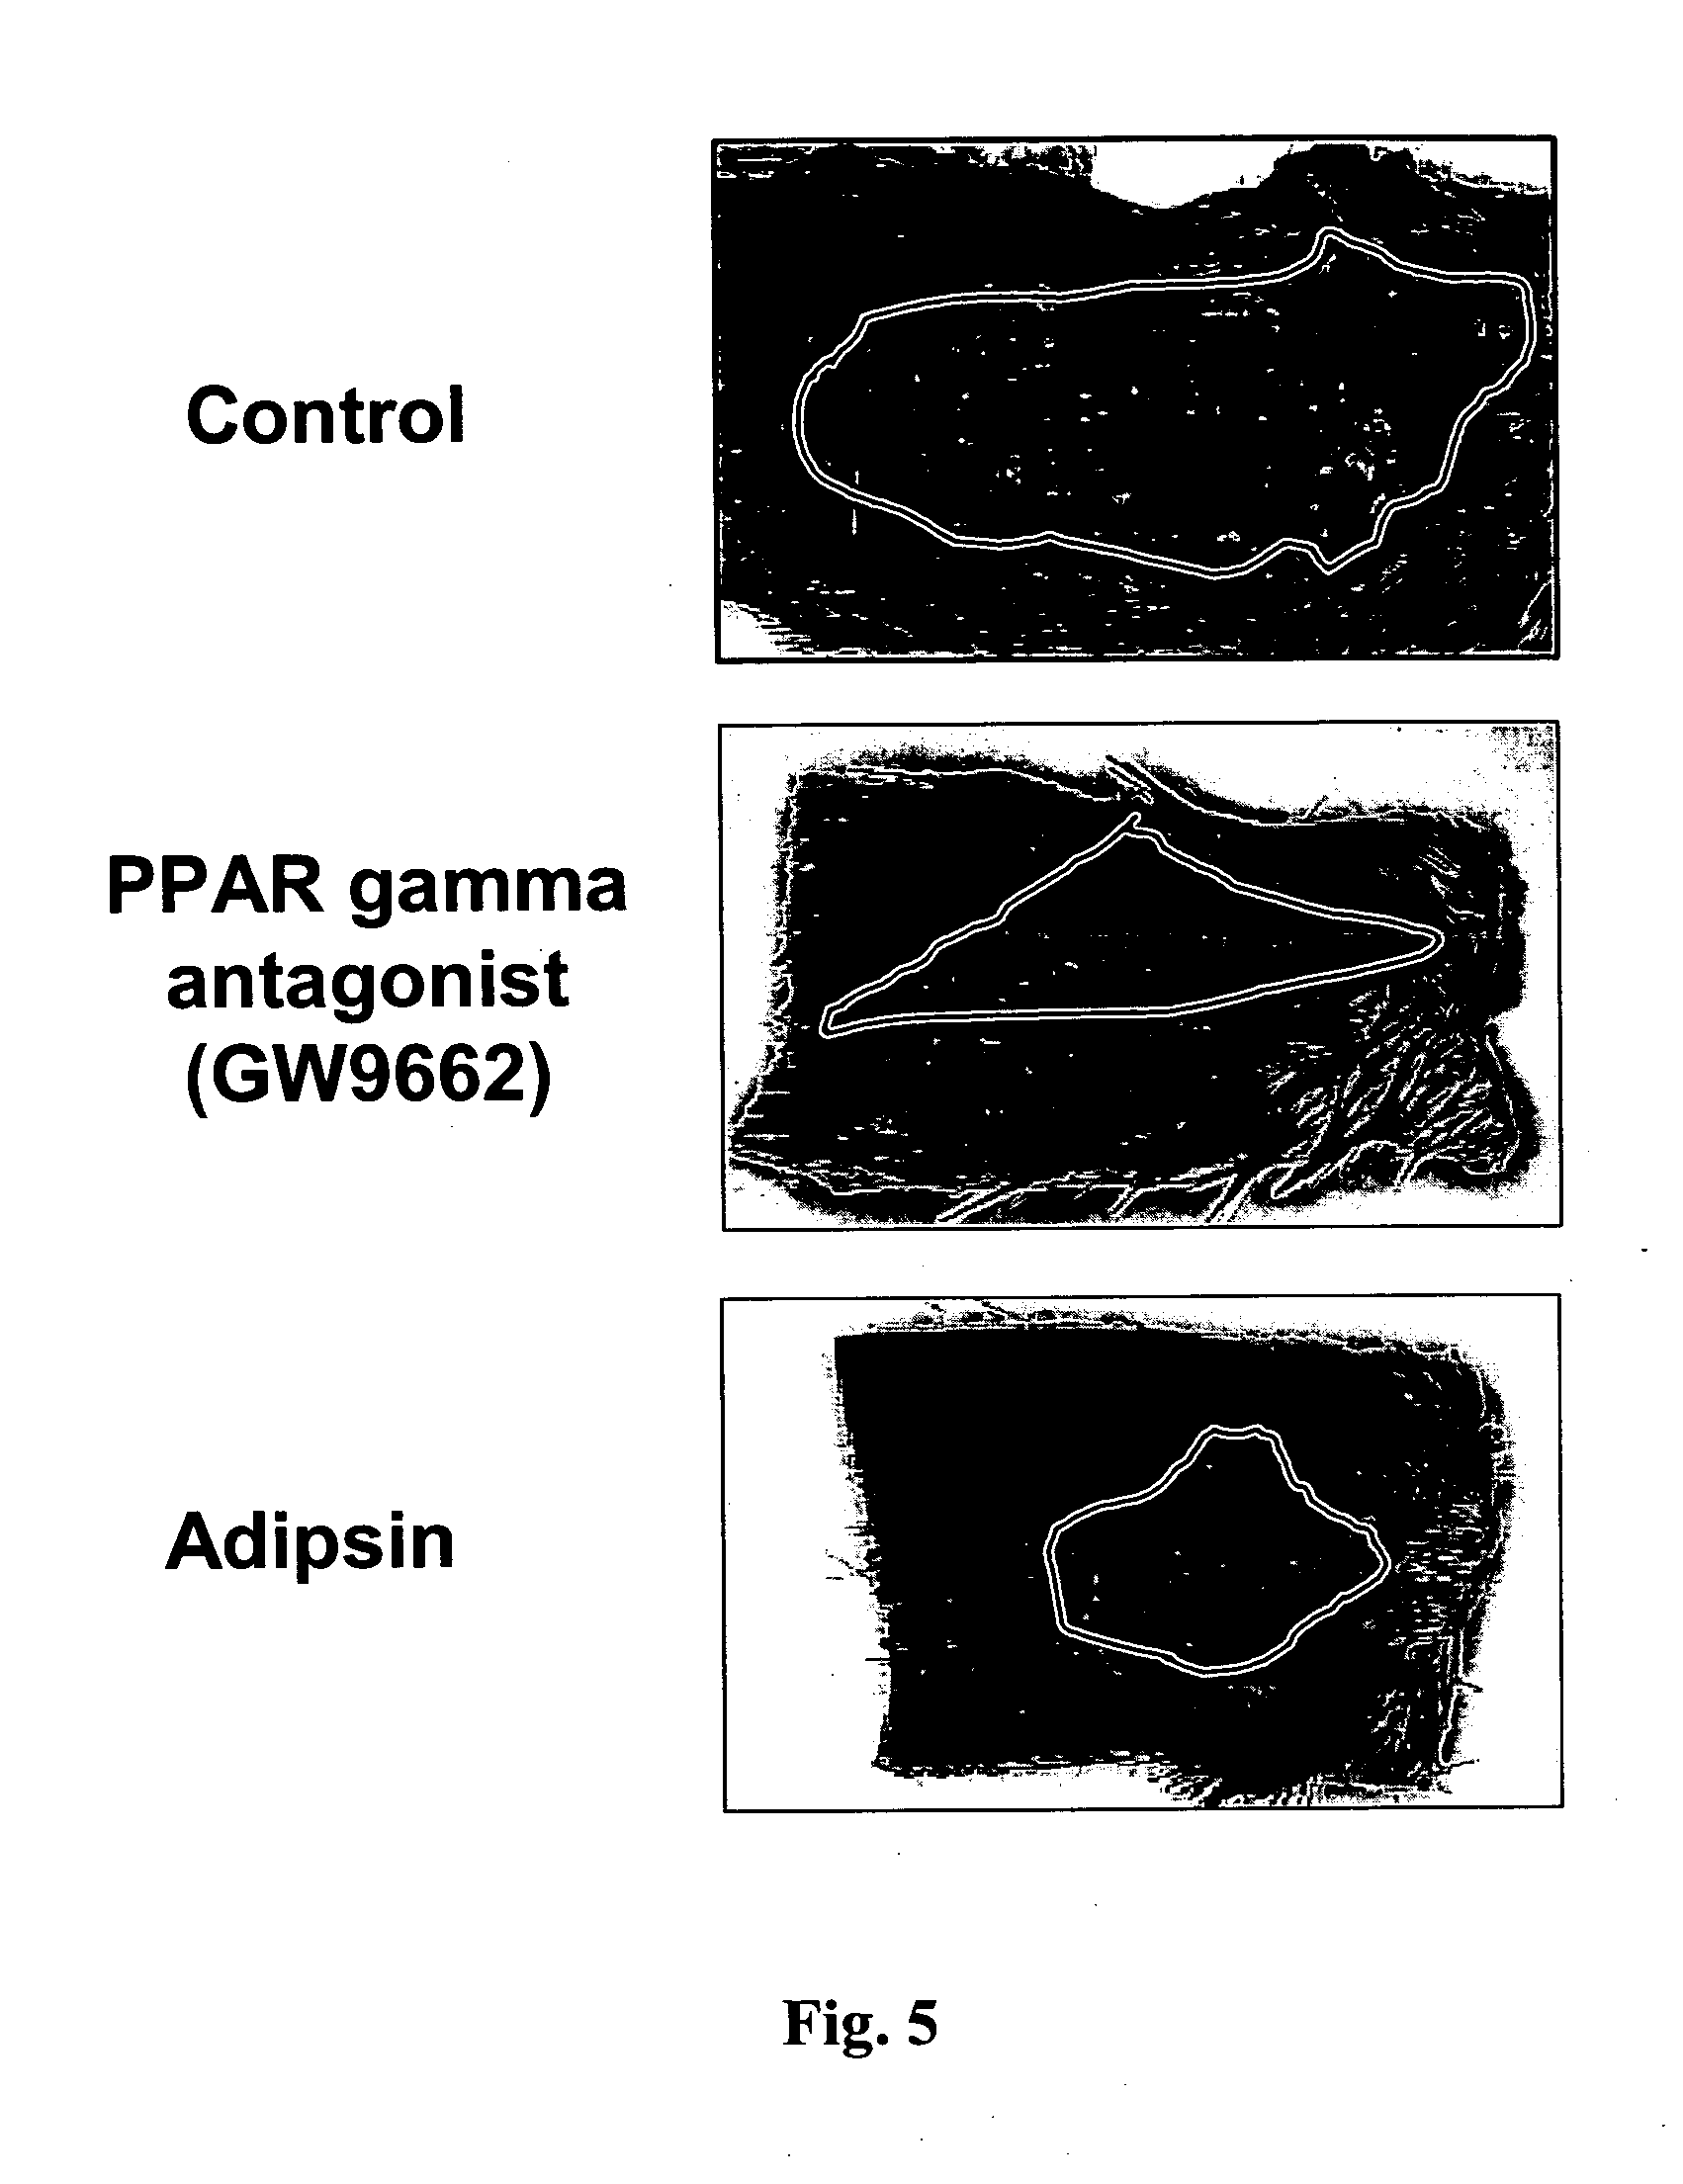 Methods for accelerating wound healing by administration of adipokines